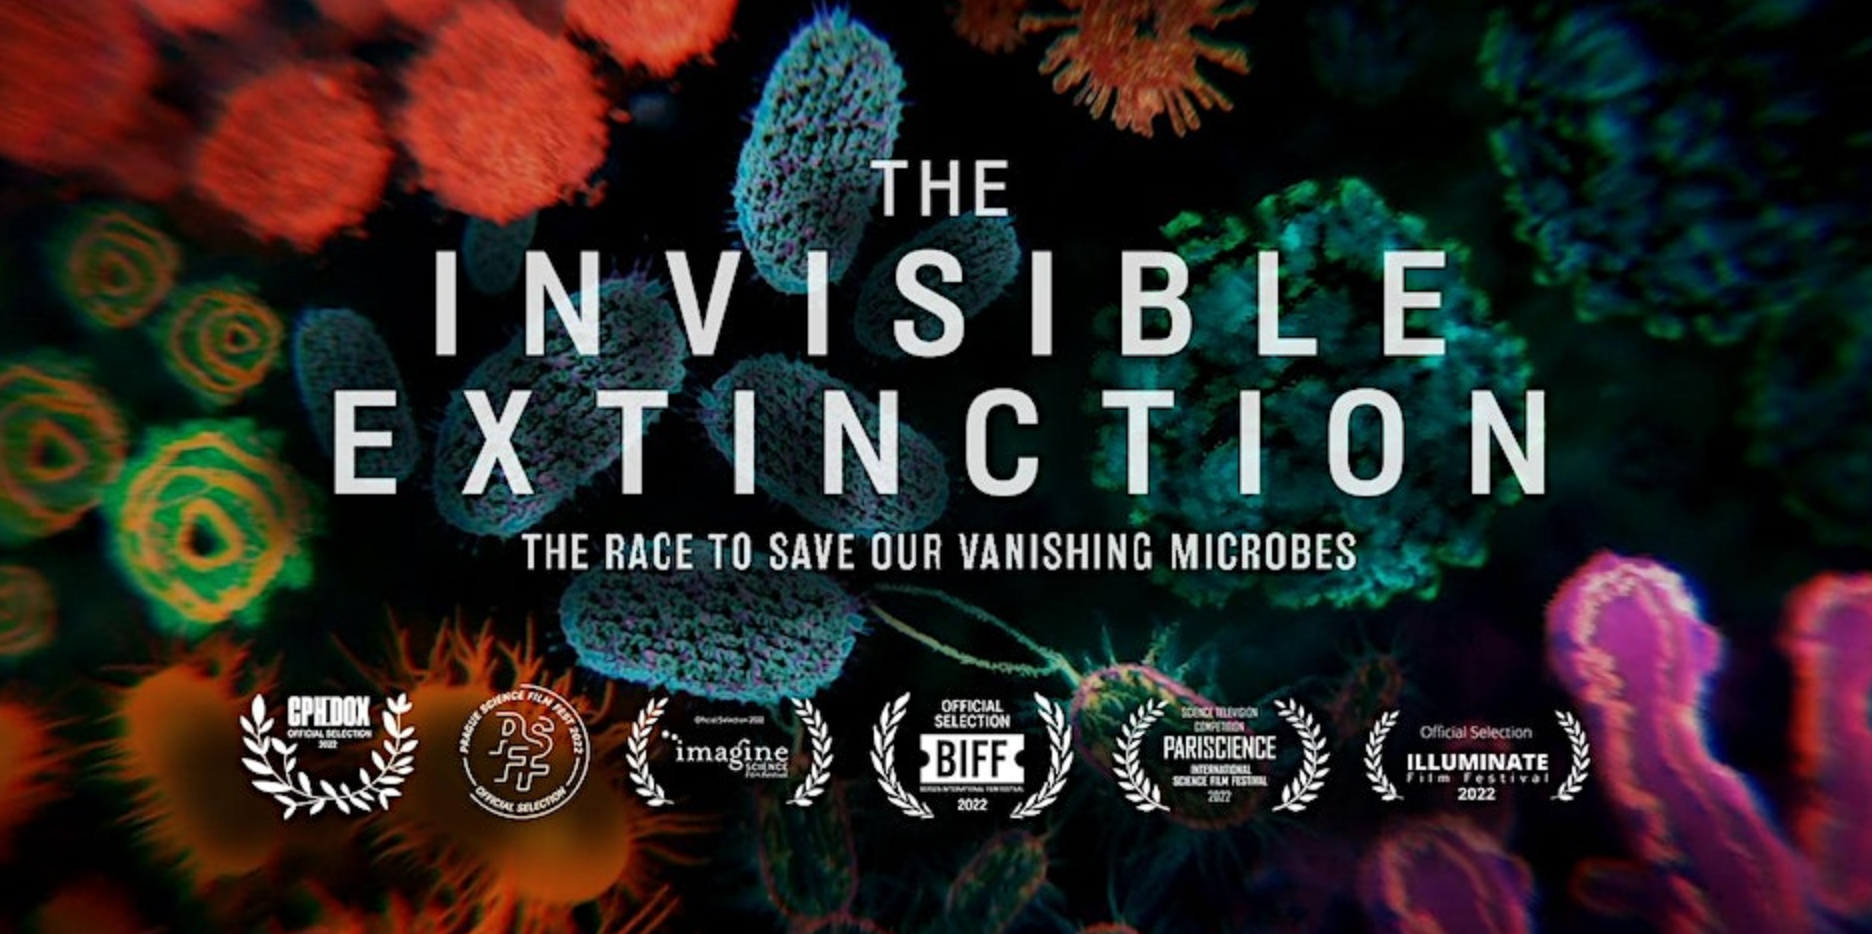 The Invisible Extinction Documentary Screening